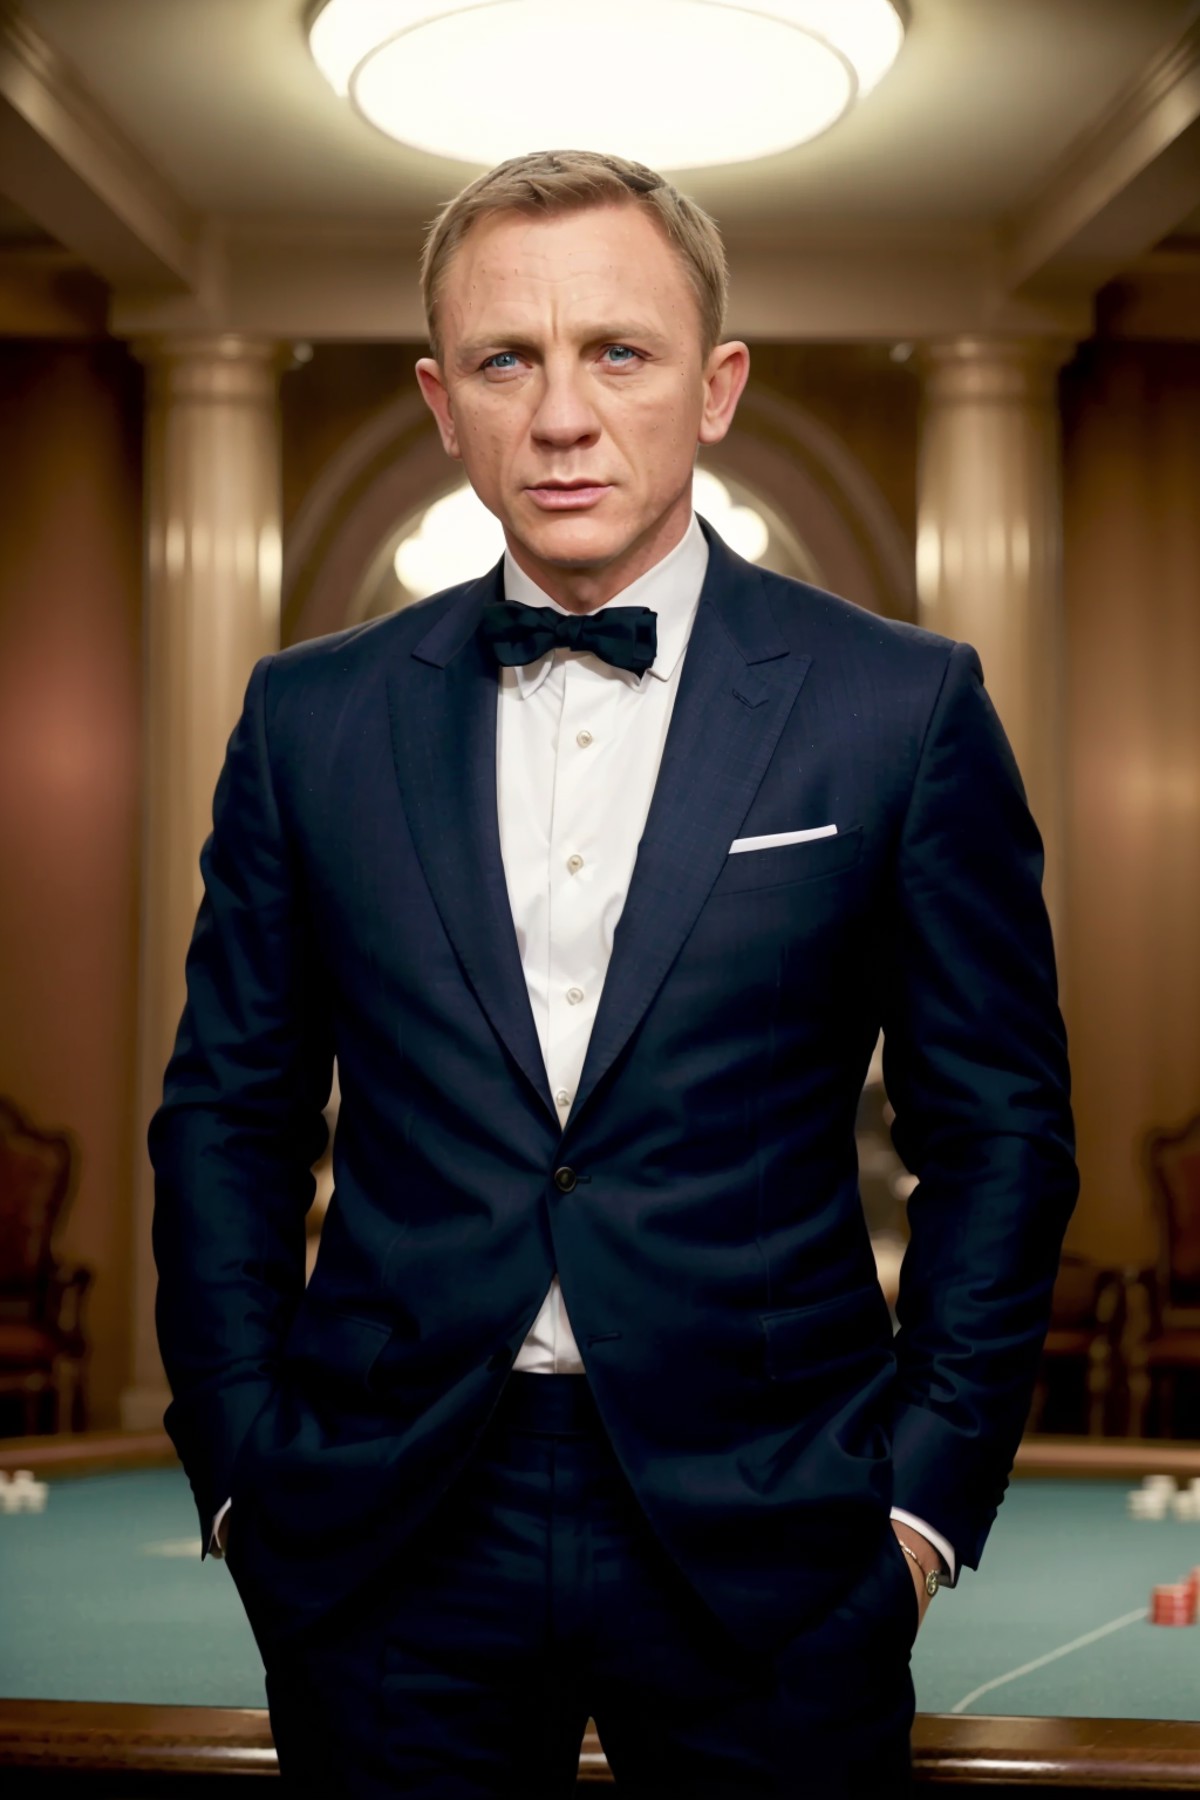 modelshoot style photo of danielcraig as James Bond standing in a casino, (masterpiece:1.2) (photorealistic:1.2) (bokeh) (...